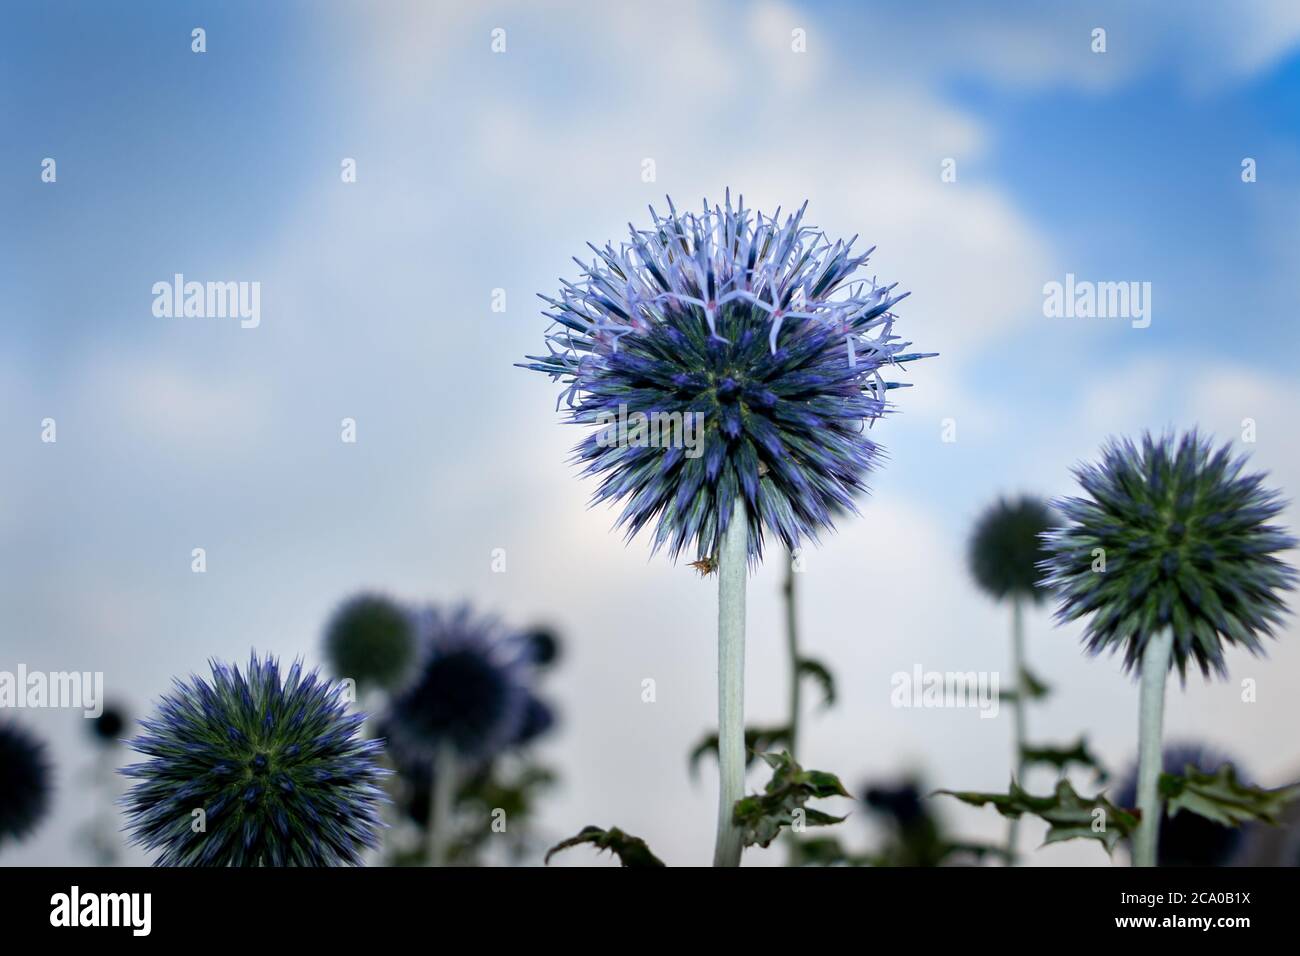 The blue globe thistle fully blooming in the summertime,  the Netherlands, photo taken in frog perspective Stock Photo